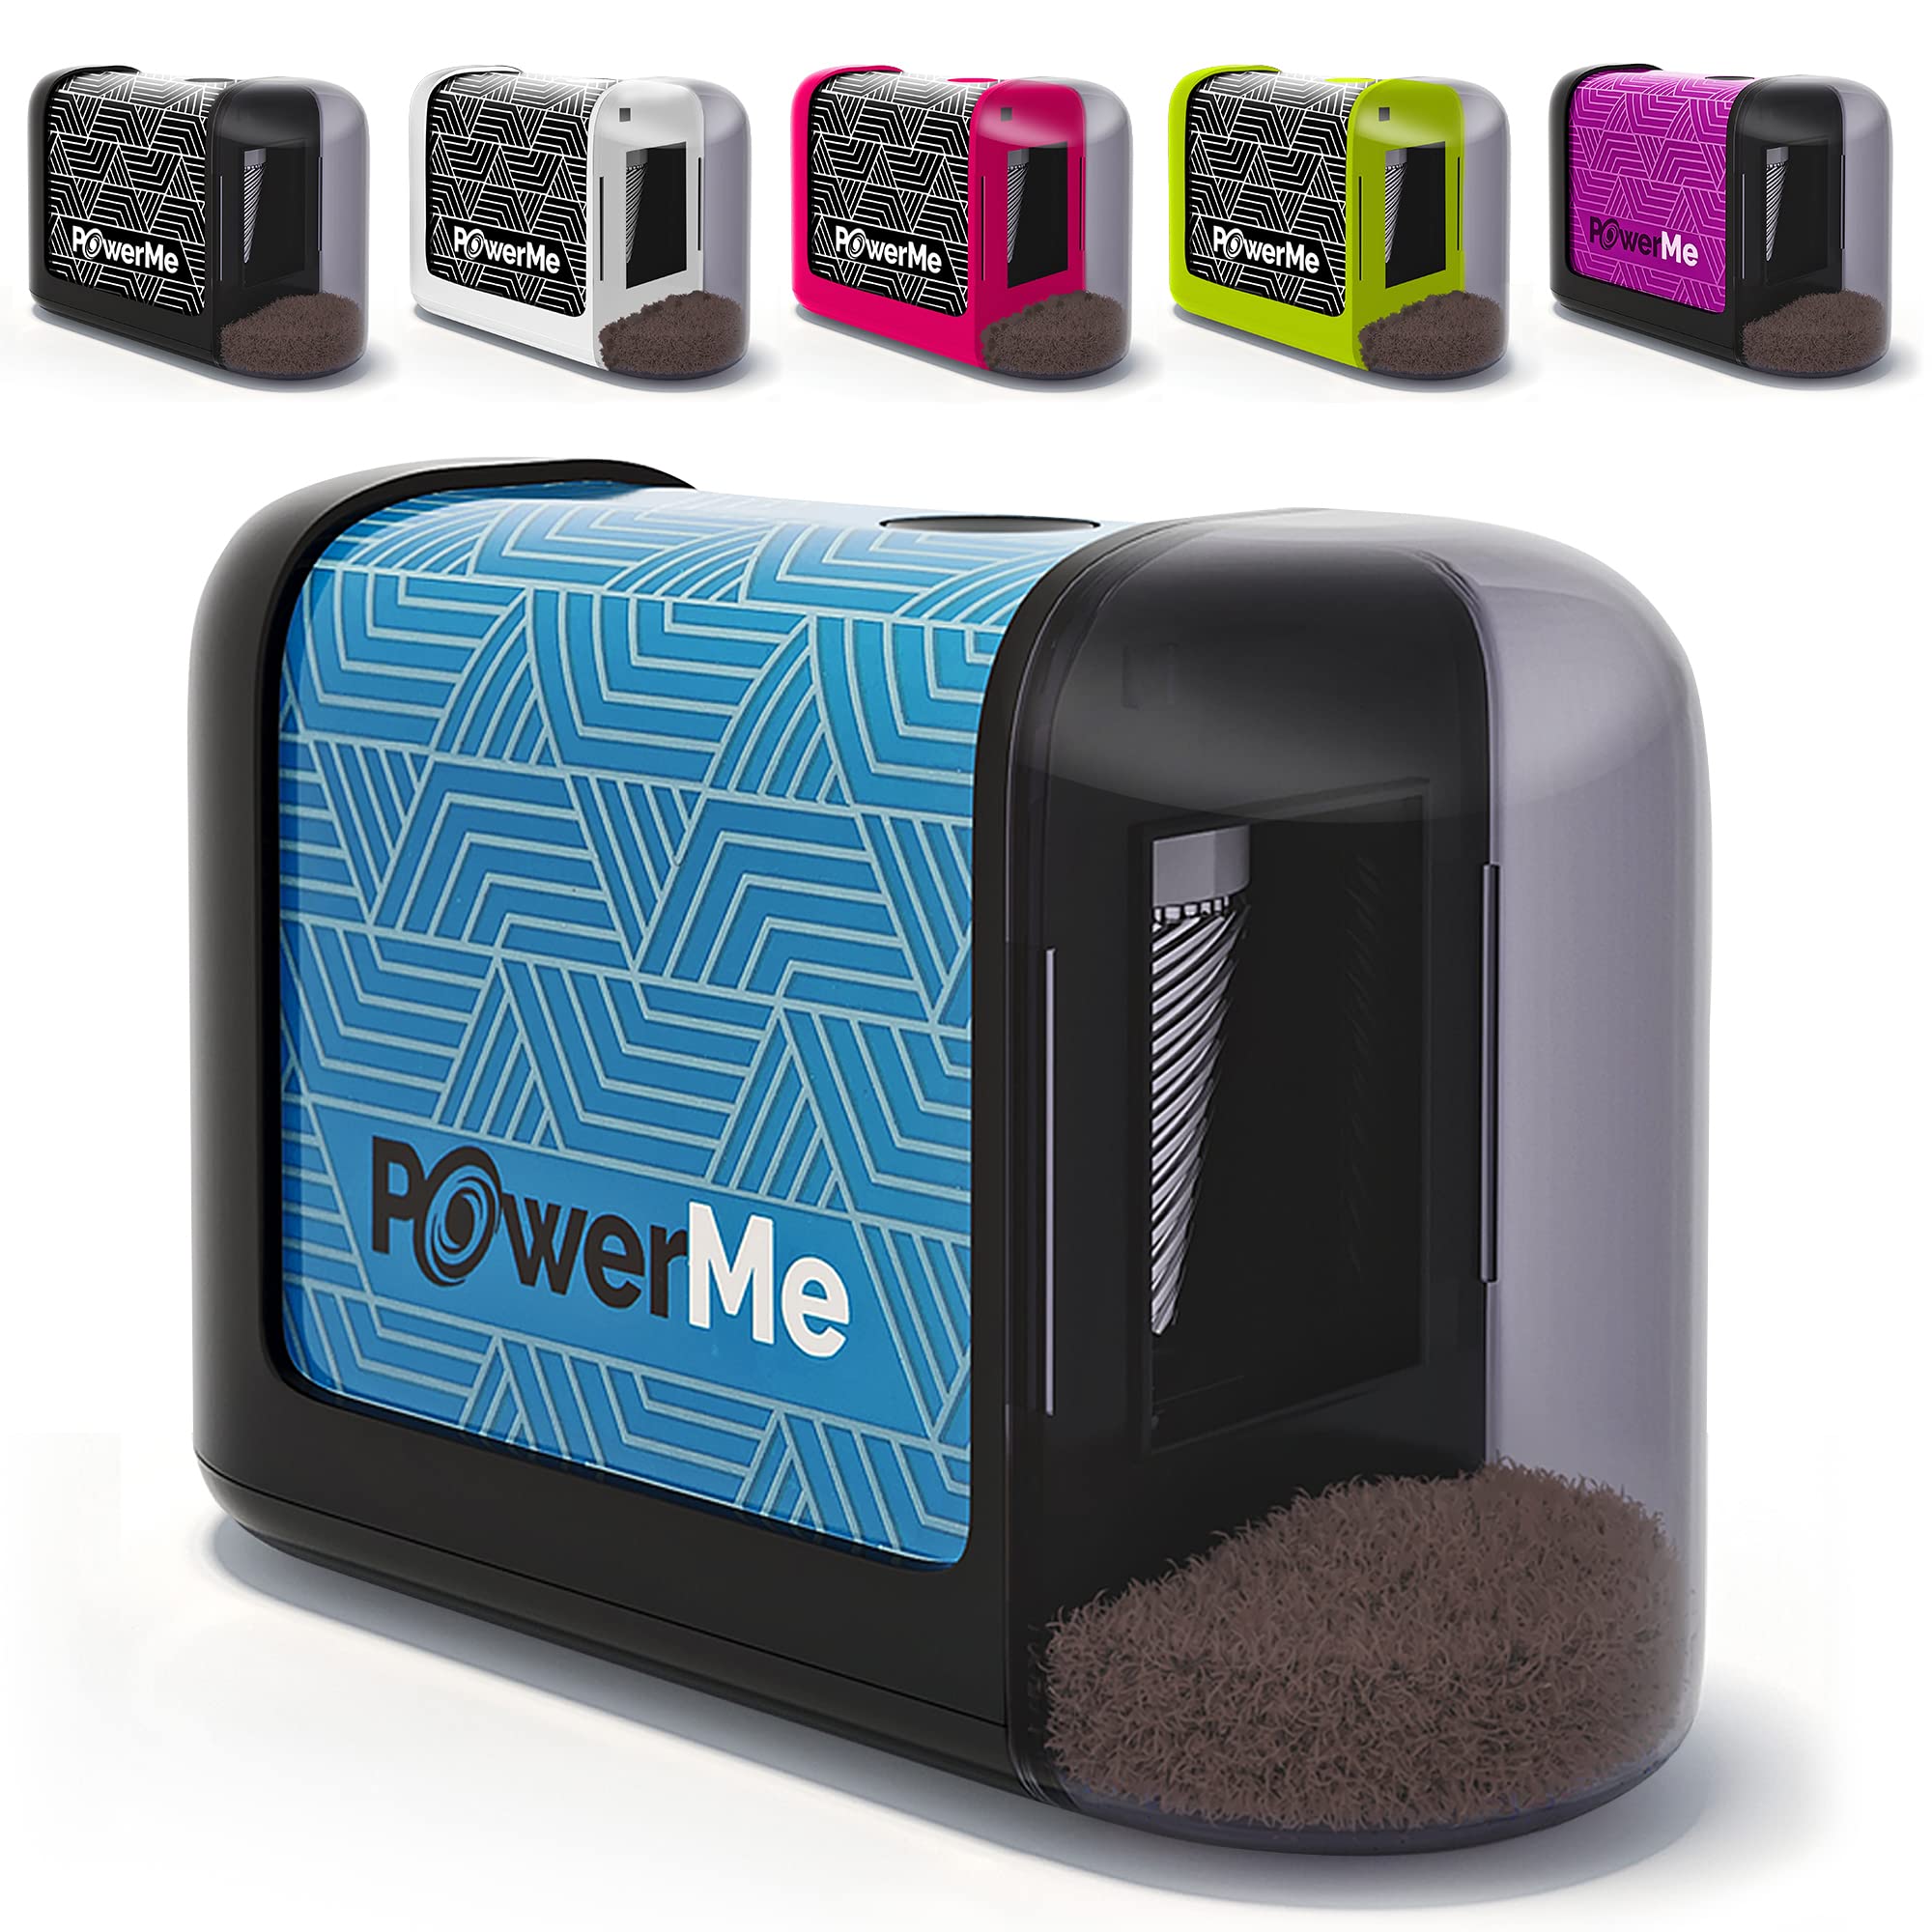 POWERME Electric Pencil Sharpener - Pencil Sharpener Battery Powered for  Kids School Home Office Classroom Artists Battery Operated Pencil Sharpener  For Colored Pencils Ideal For No. 2 (Blue)